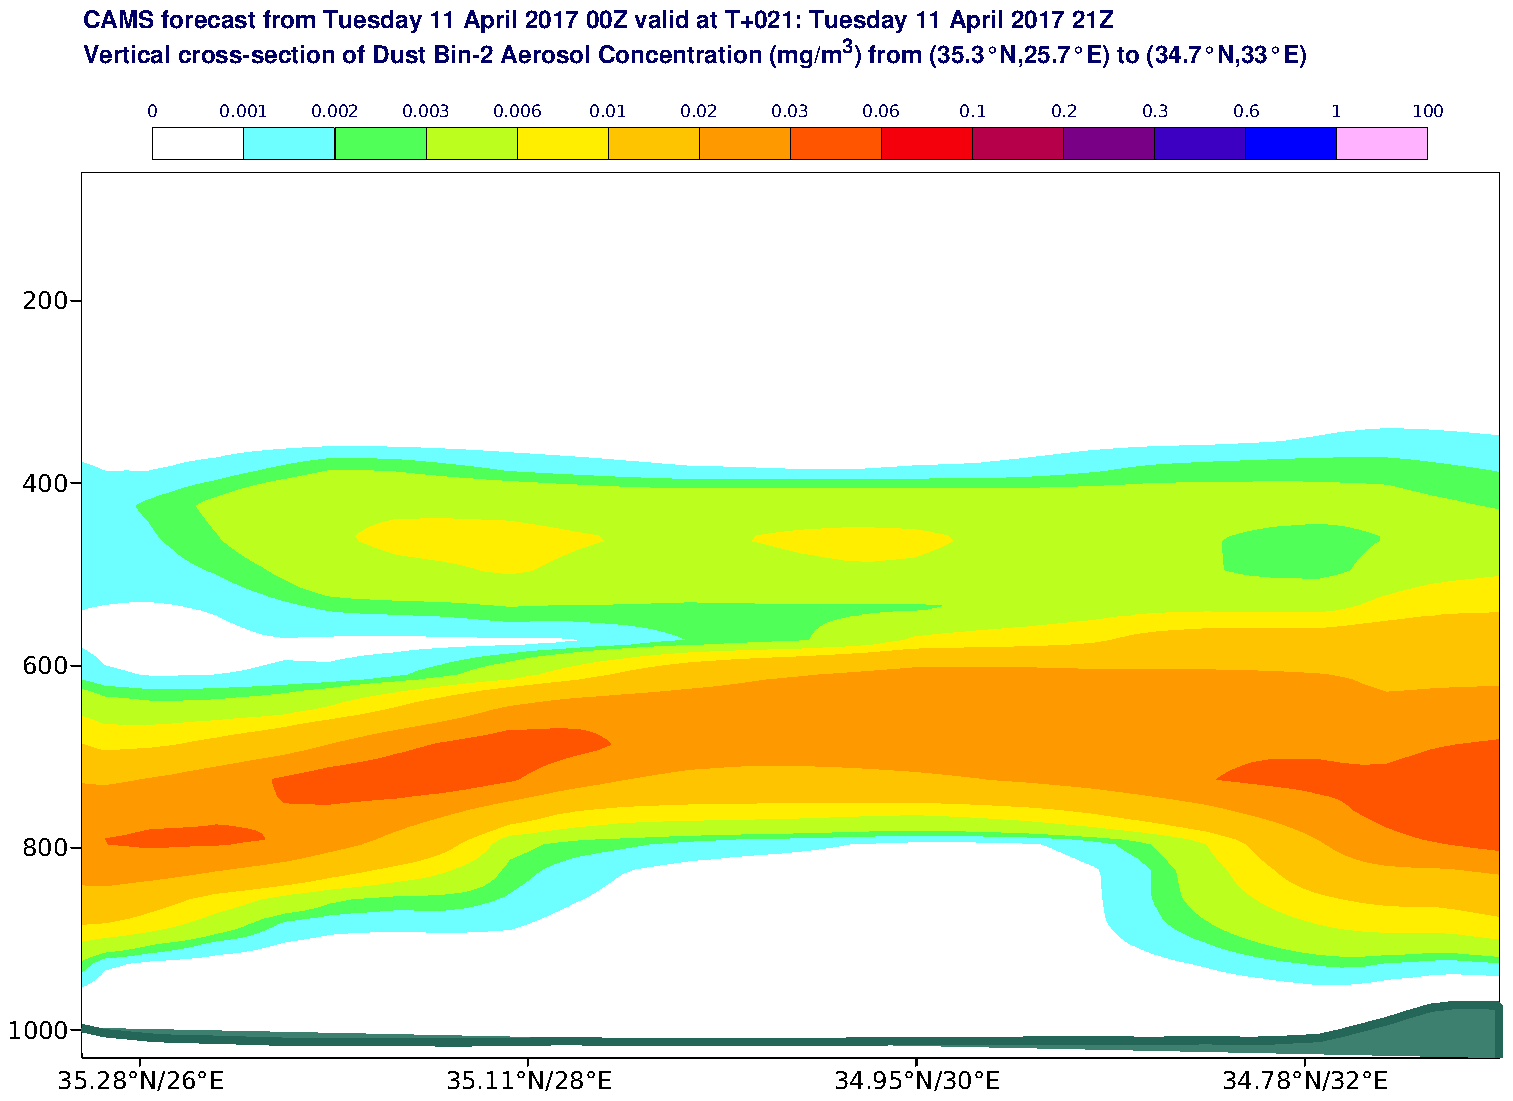 Vertical cross-section of Dust Bin-2 Aerosol Concentration (mg/m3) valid at T21 - 2017-04-11 21:00